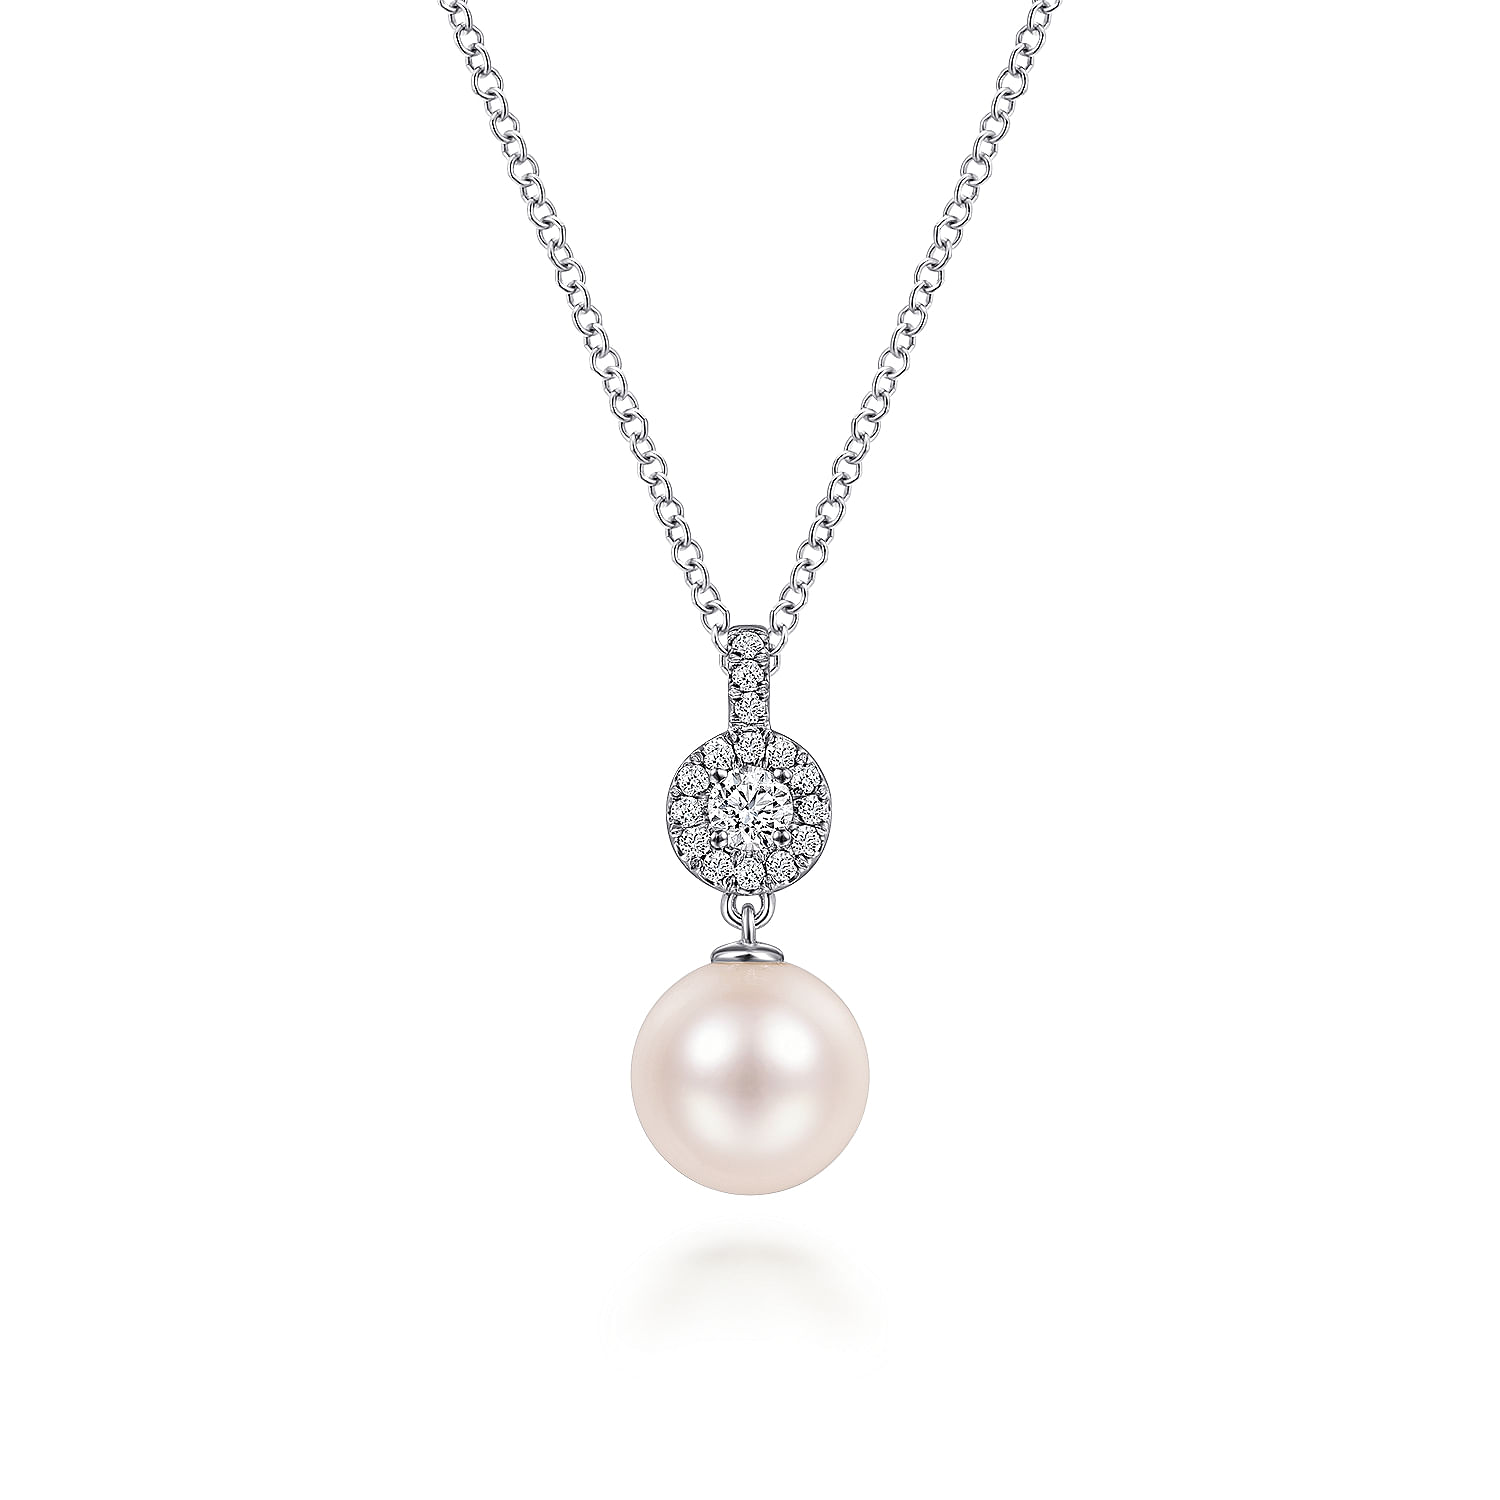 14K White Gold Diamond Pave Halo and Pearl Drop Pendant Necklace